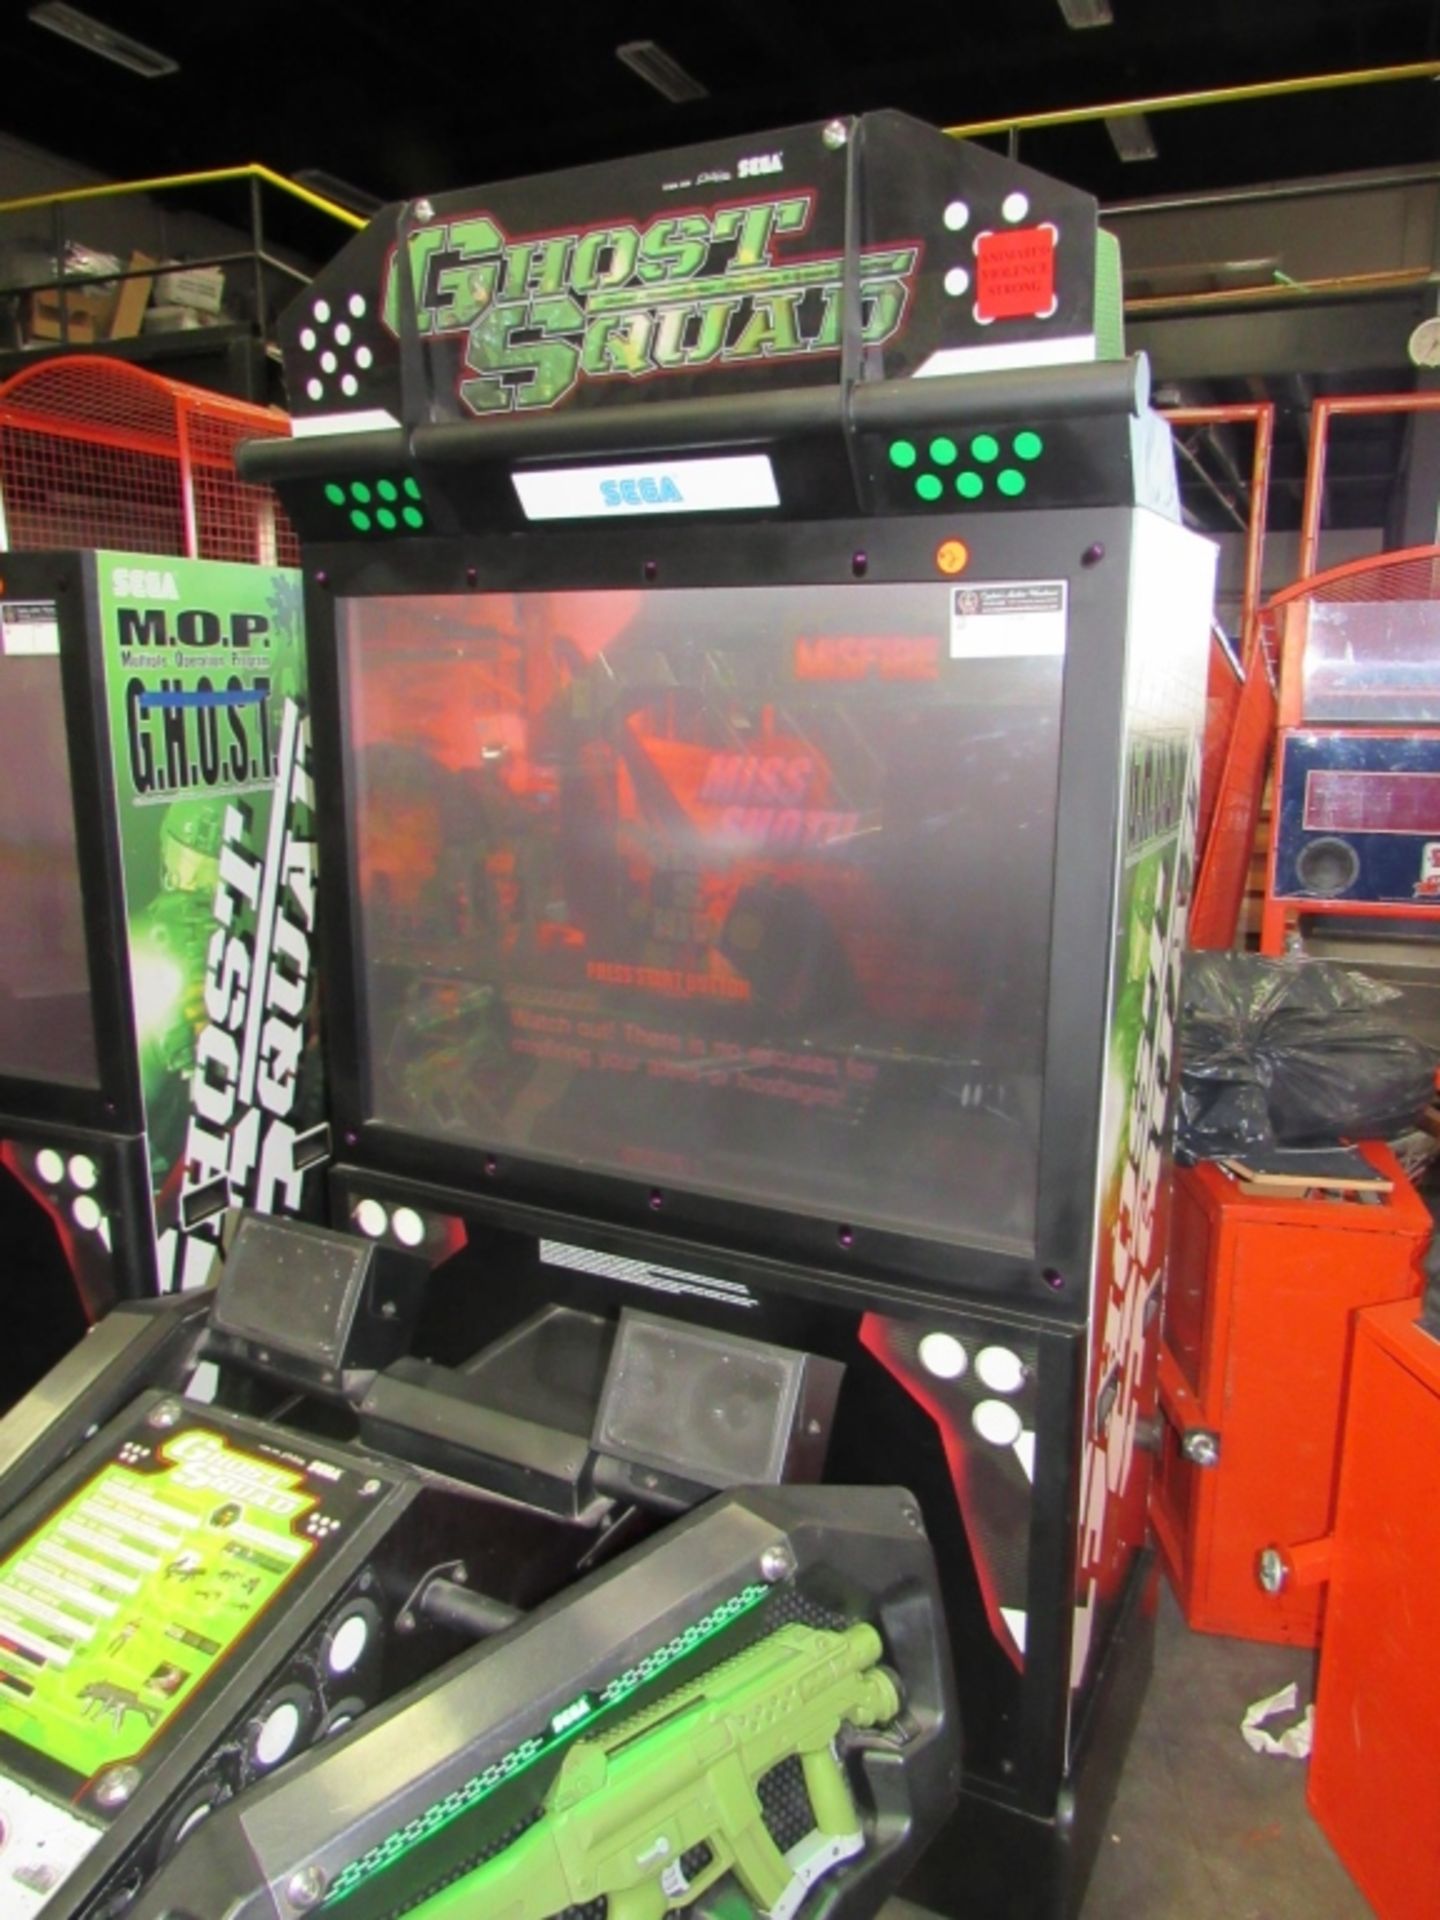 GHOST SQUAD DELUXE SHOOTER ARCADE GAME #2 SE - Image 4 of 5